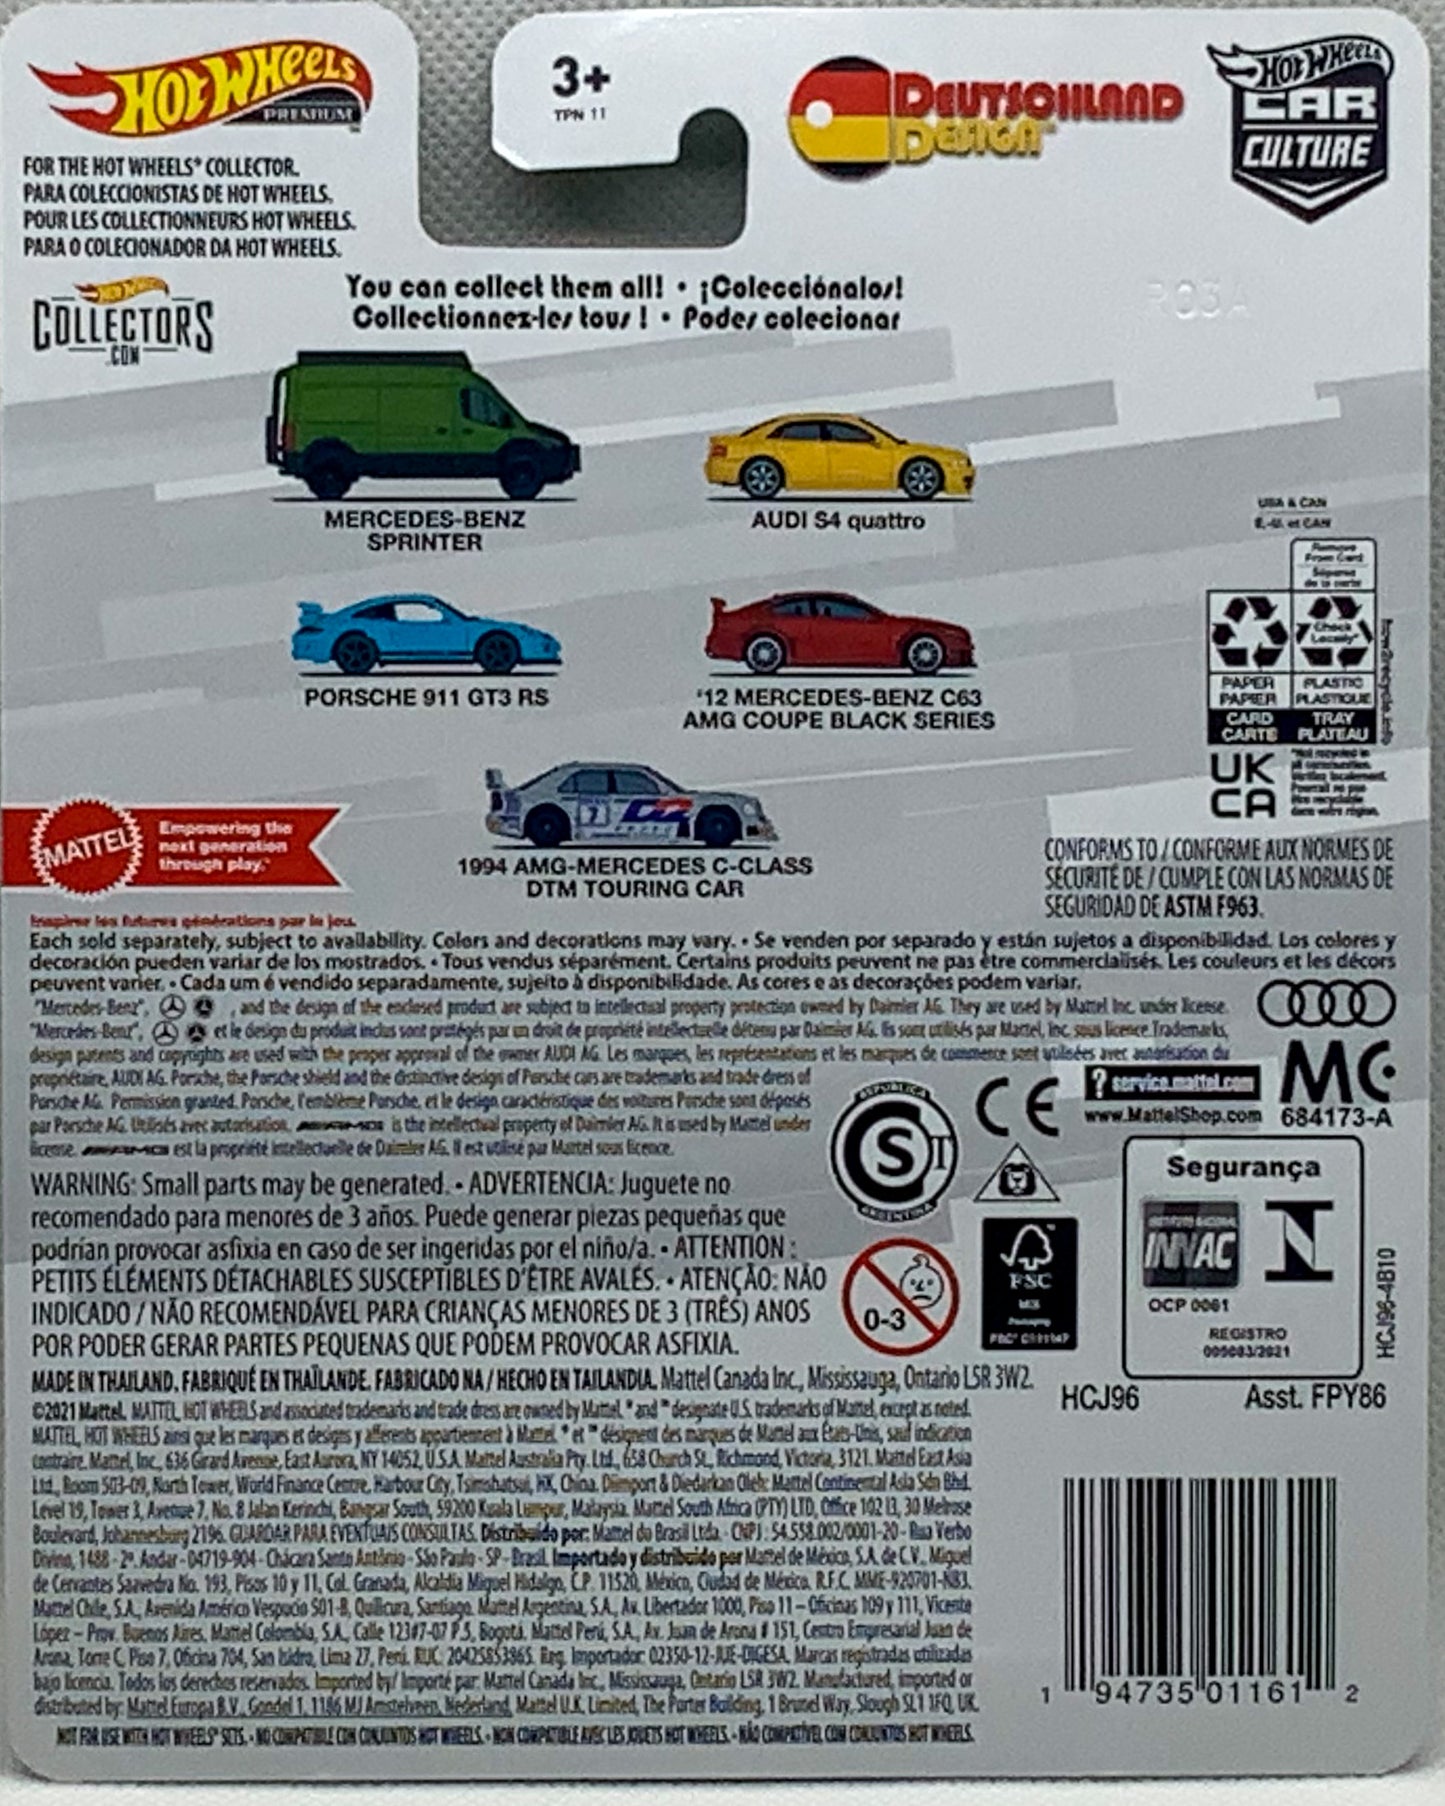 Buy at Tatoy Shop Back of Card shows the 5 Cars on Series Mercedes-Benz, Audi, Porsche, AMG Mercedes Premium Collections